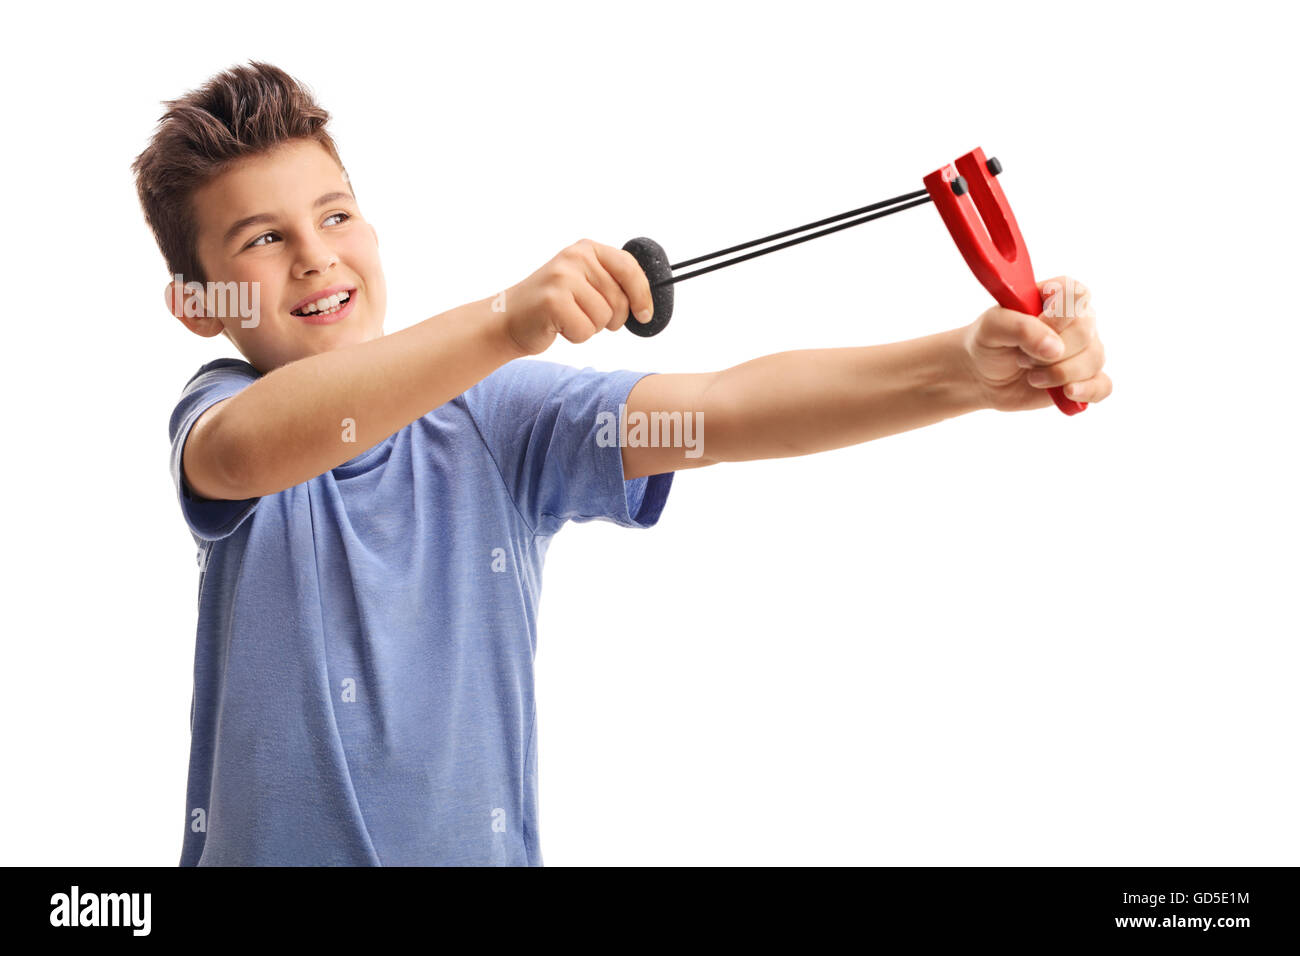 Cheerful little kid shooting with a slingshot isolated on white background Stock Photo